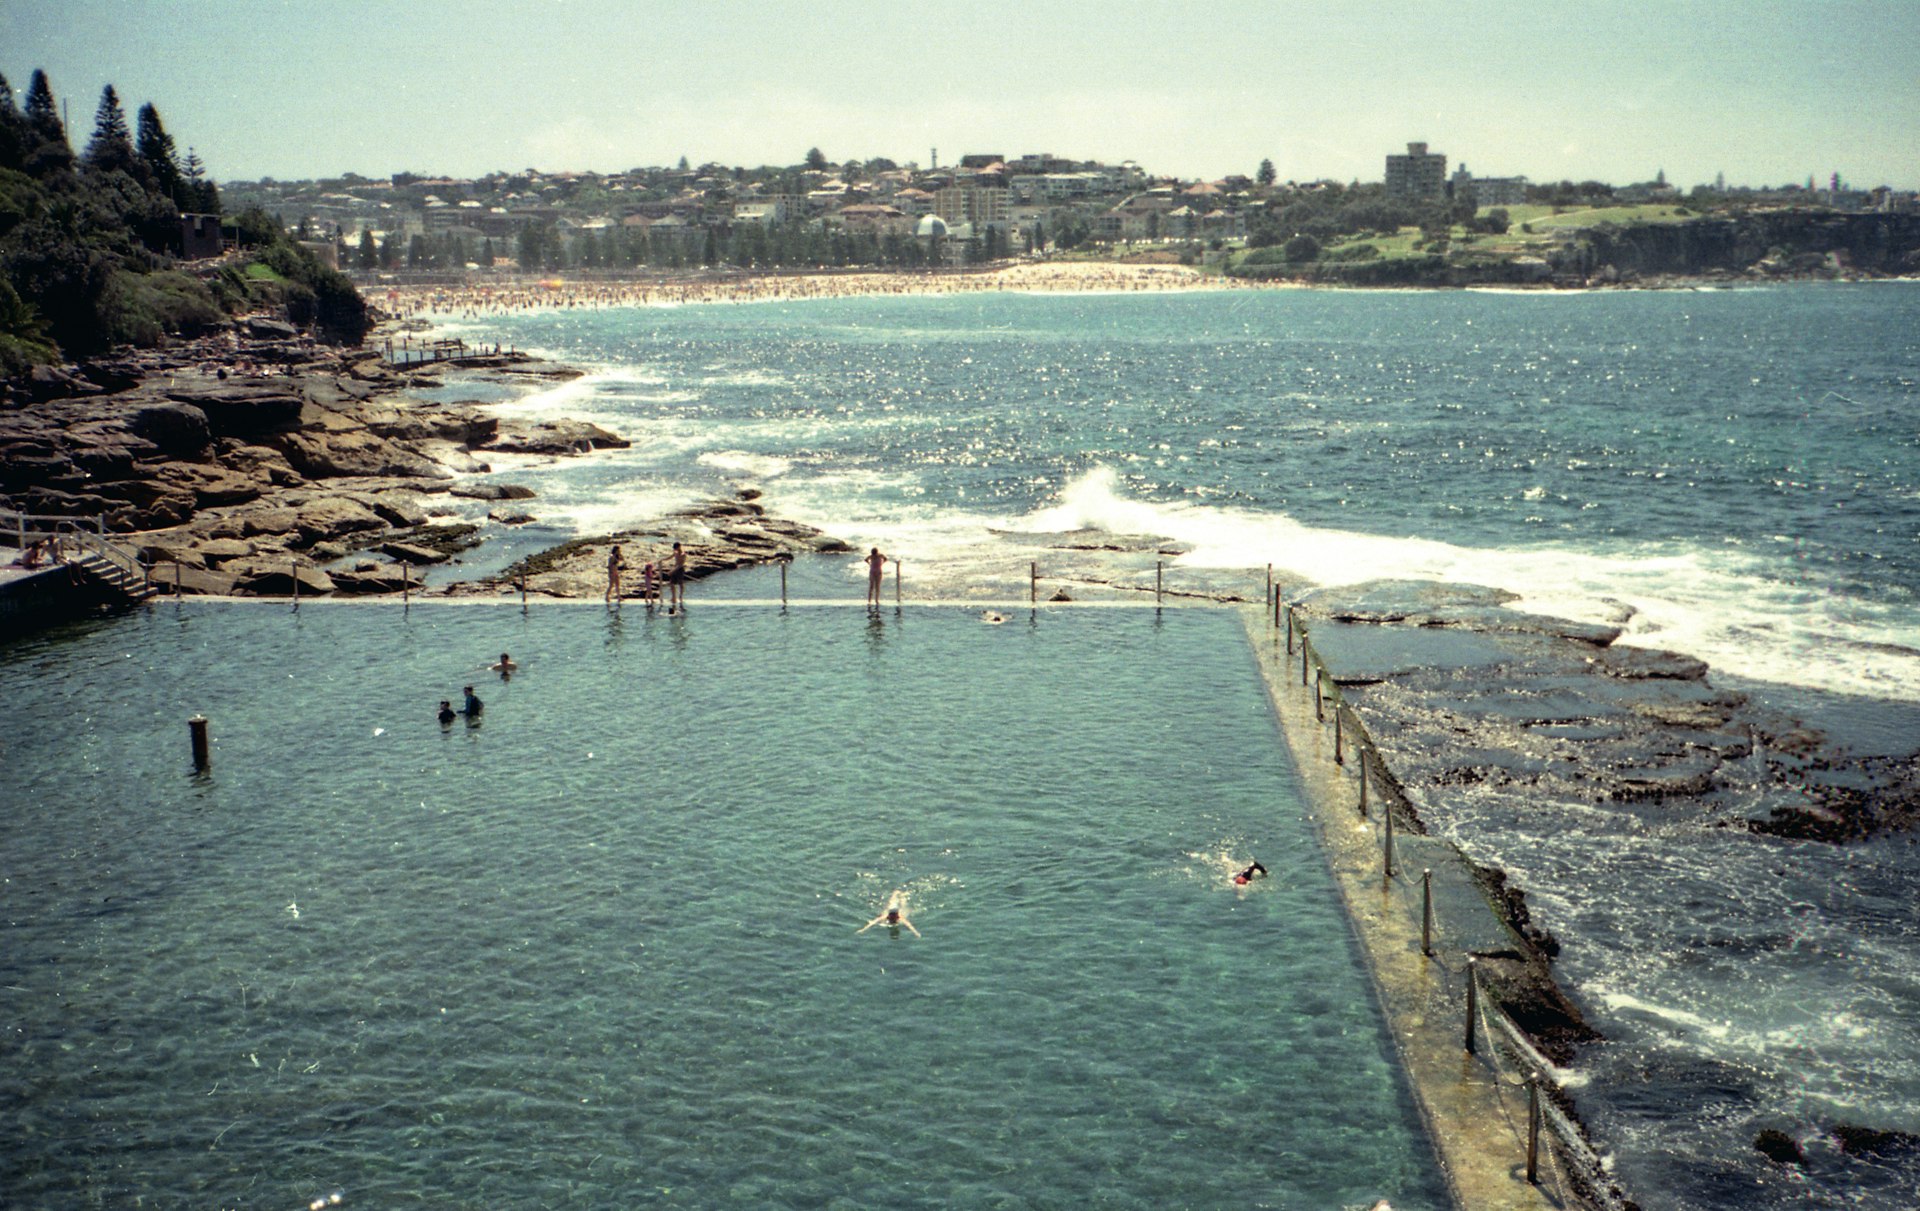 A swimming pool built just at wave level above the ocean, with a view over the sea towards a golden sand beach